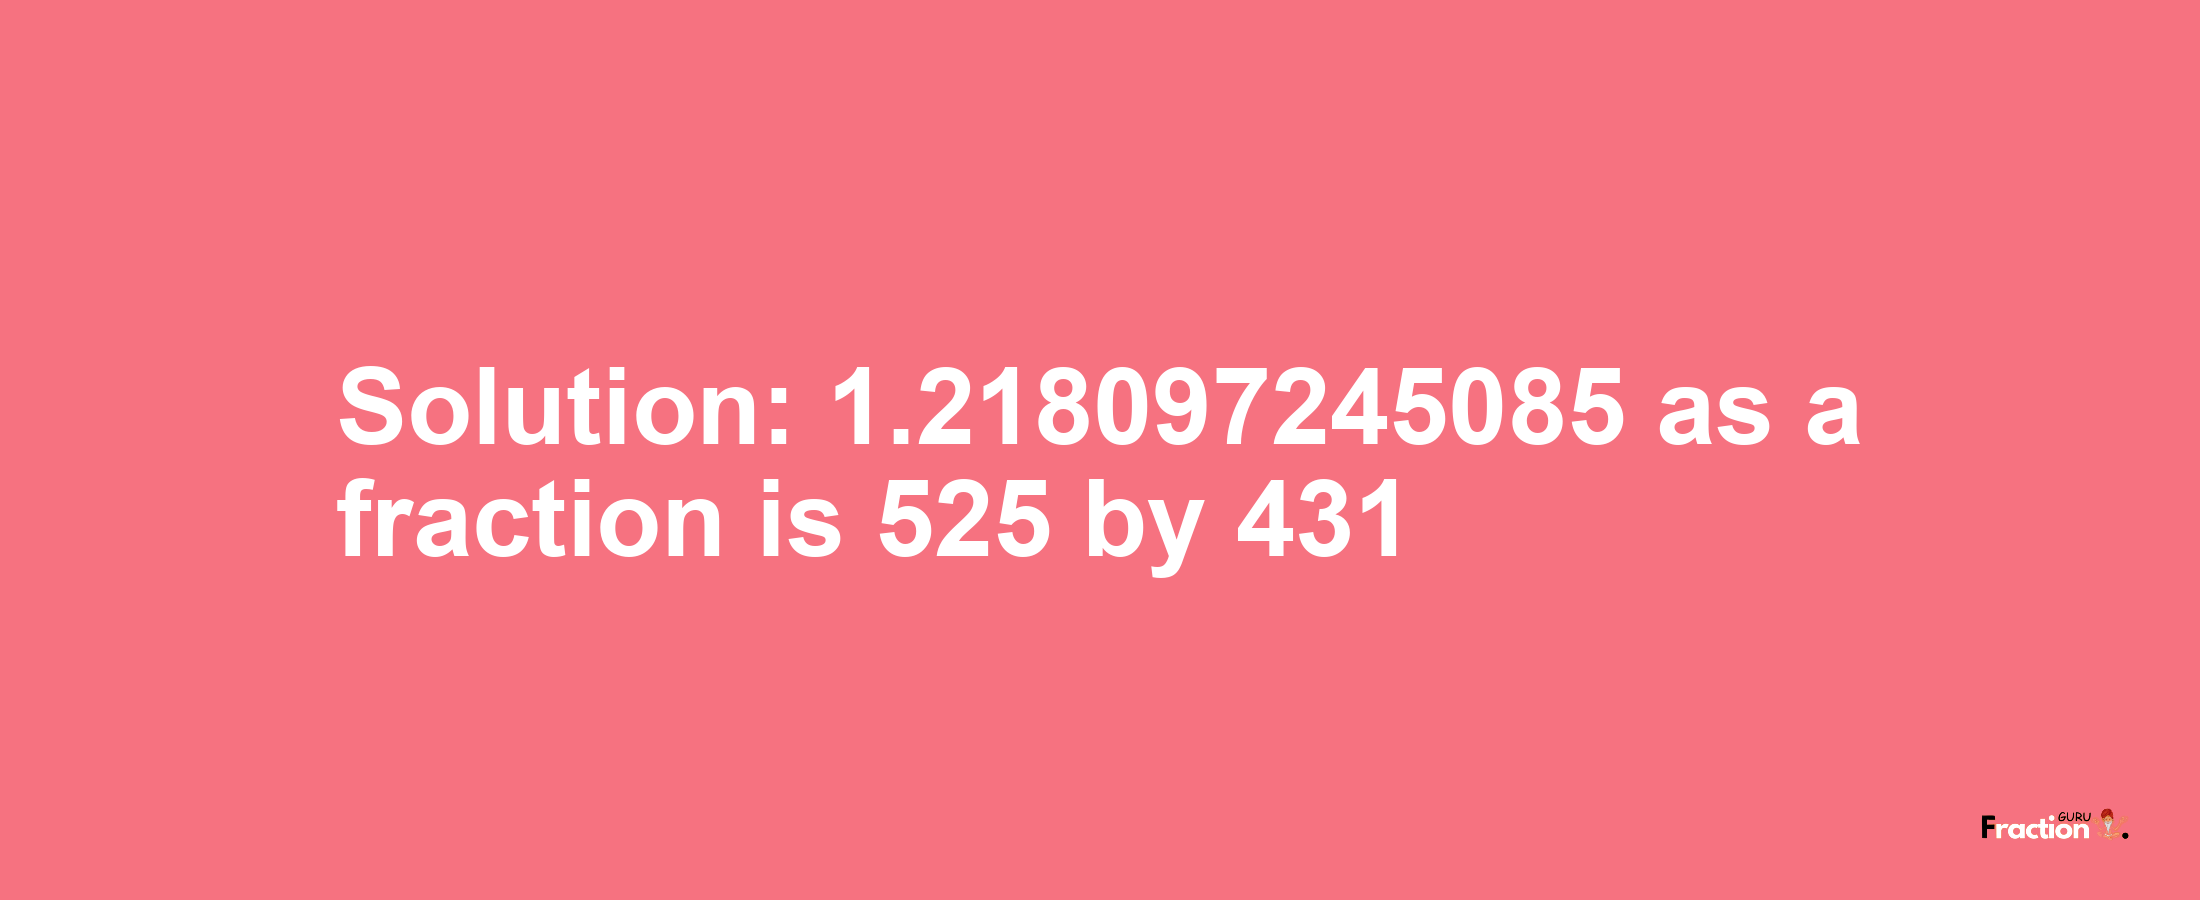 Solution:1.218097245085 as a fraction is 525/431